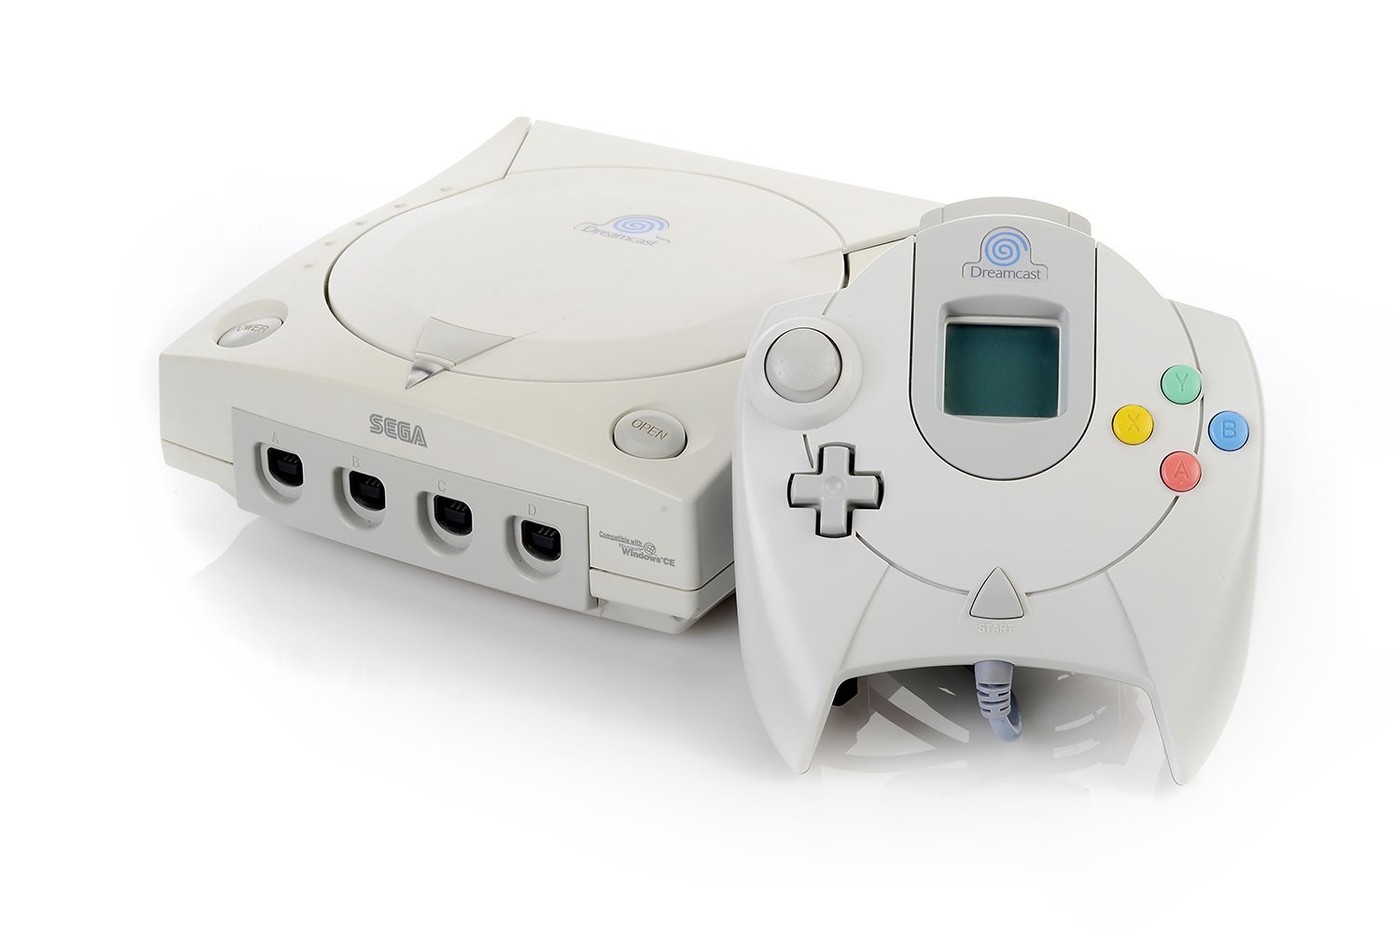  Sega Dreamcast Mini is being released - Esquire Middle East